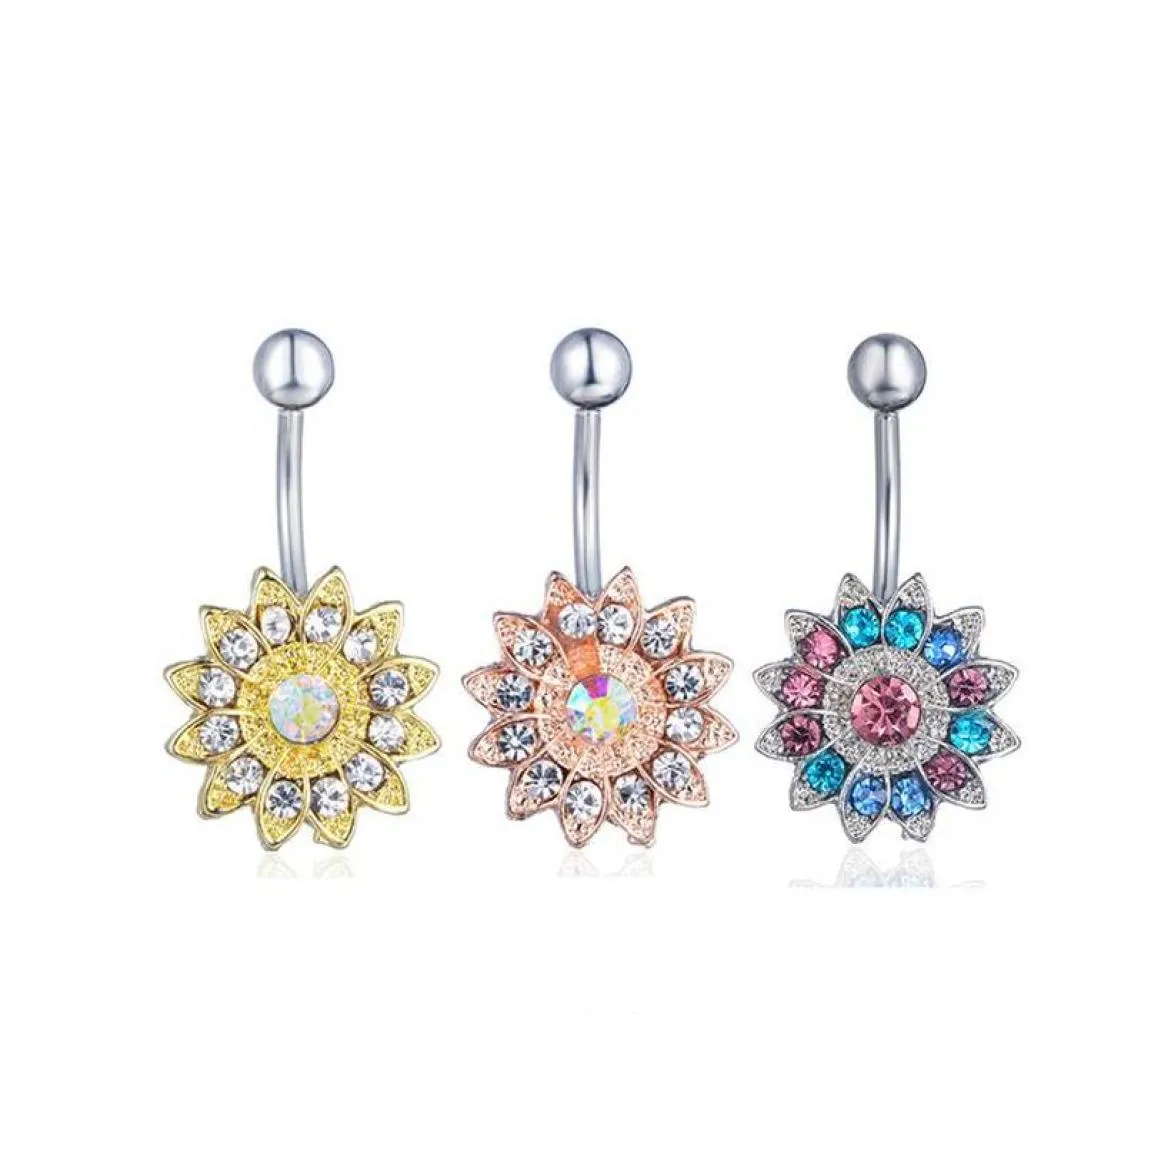 4 Color Clear Ab Style Navel Button Ring Piercing Body Jewlery 1.6x11x5/8 Belly Jewelry Mq0Tb5910370